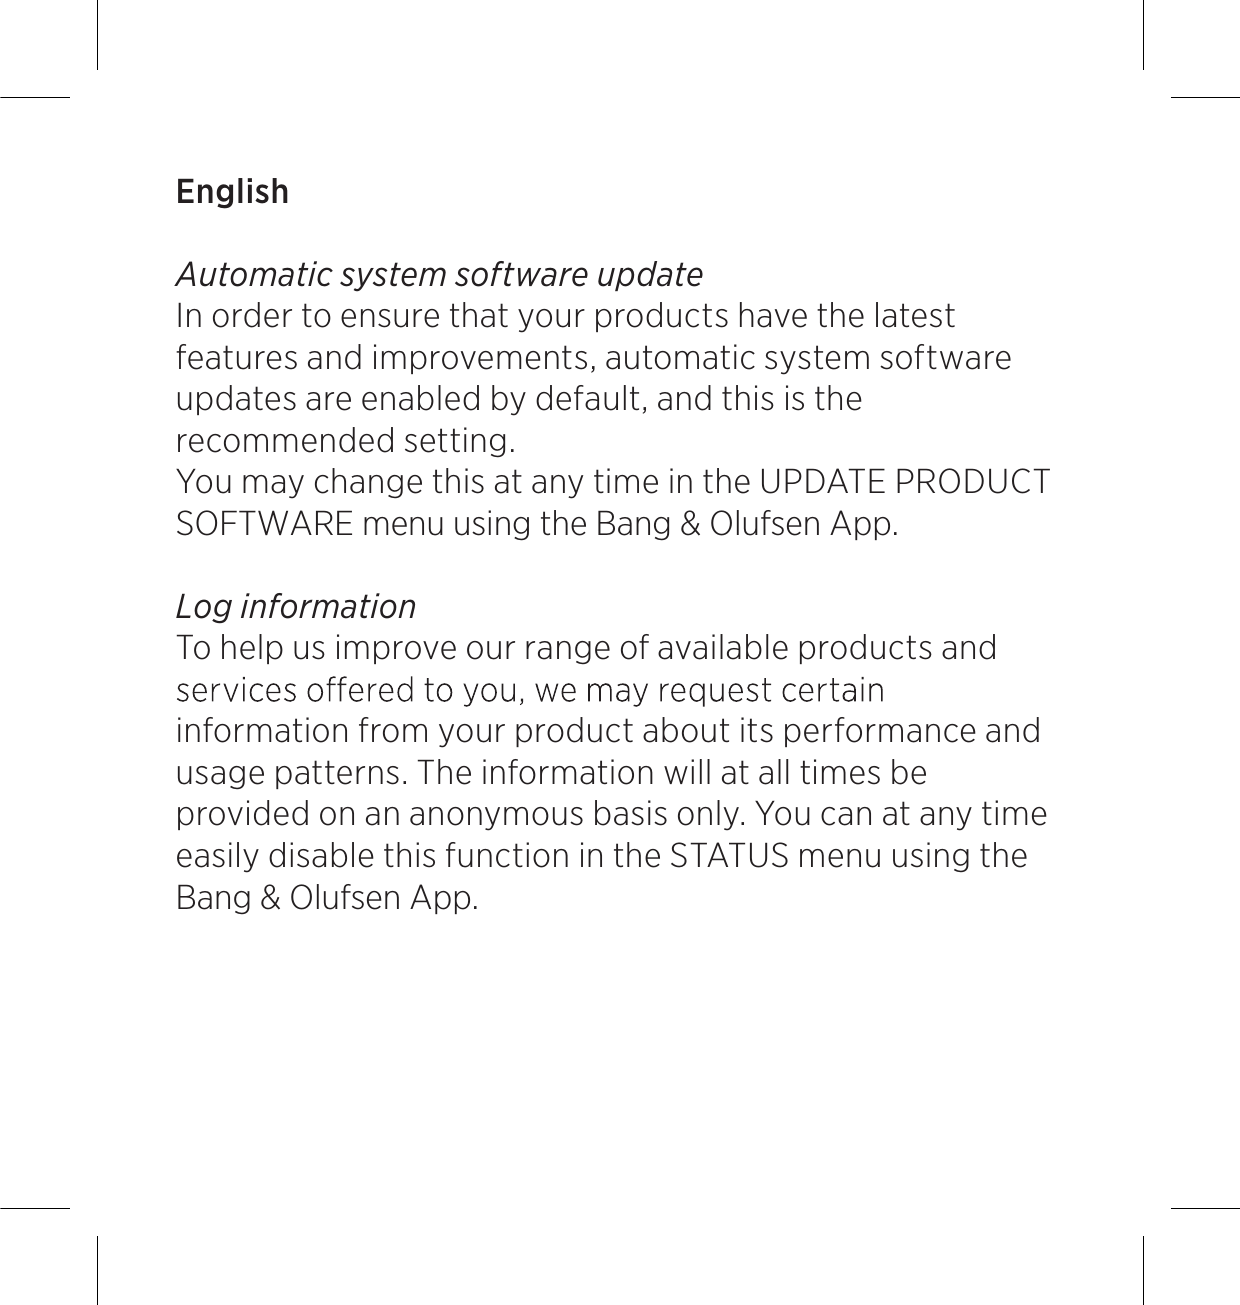 English Automatic system software update In order to ensure that your products have the latest features and improvements, automatic system software updates are enabled by default, and this is the recommended setting.  You may change this at any time in the UPDATE PRODUCT SOFTWARE menu using the Bang &amp; Olufsen App.Log information To help us improve our range of available products and information from your product about its performance and usage patterns. The information will at all times be provided on an anonymous basis only. You can at any time easily disable this function in the STATUS menu using the Bang &amp; Olufsen App.